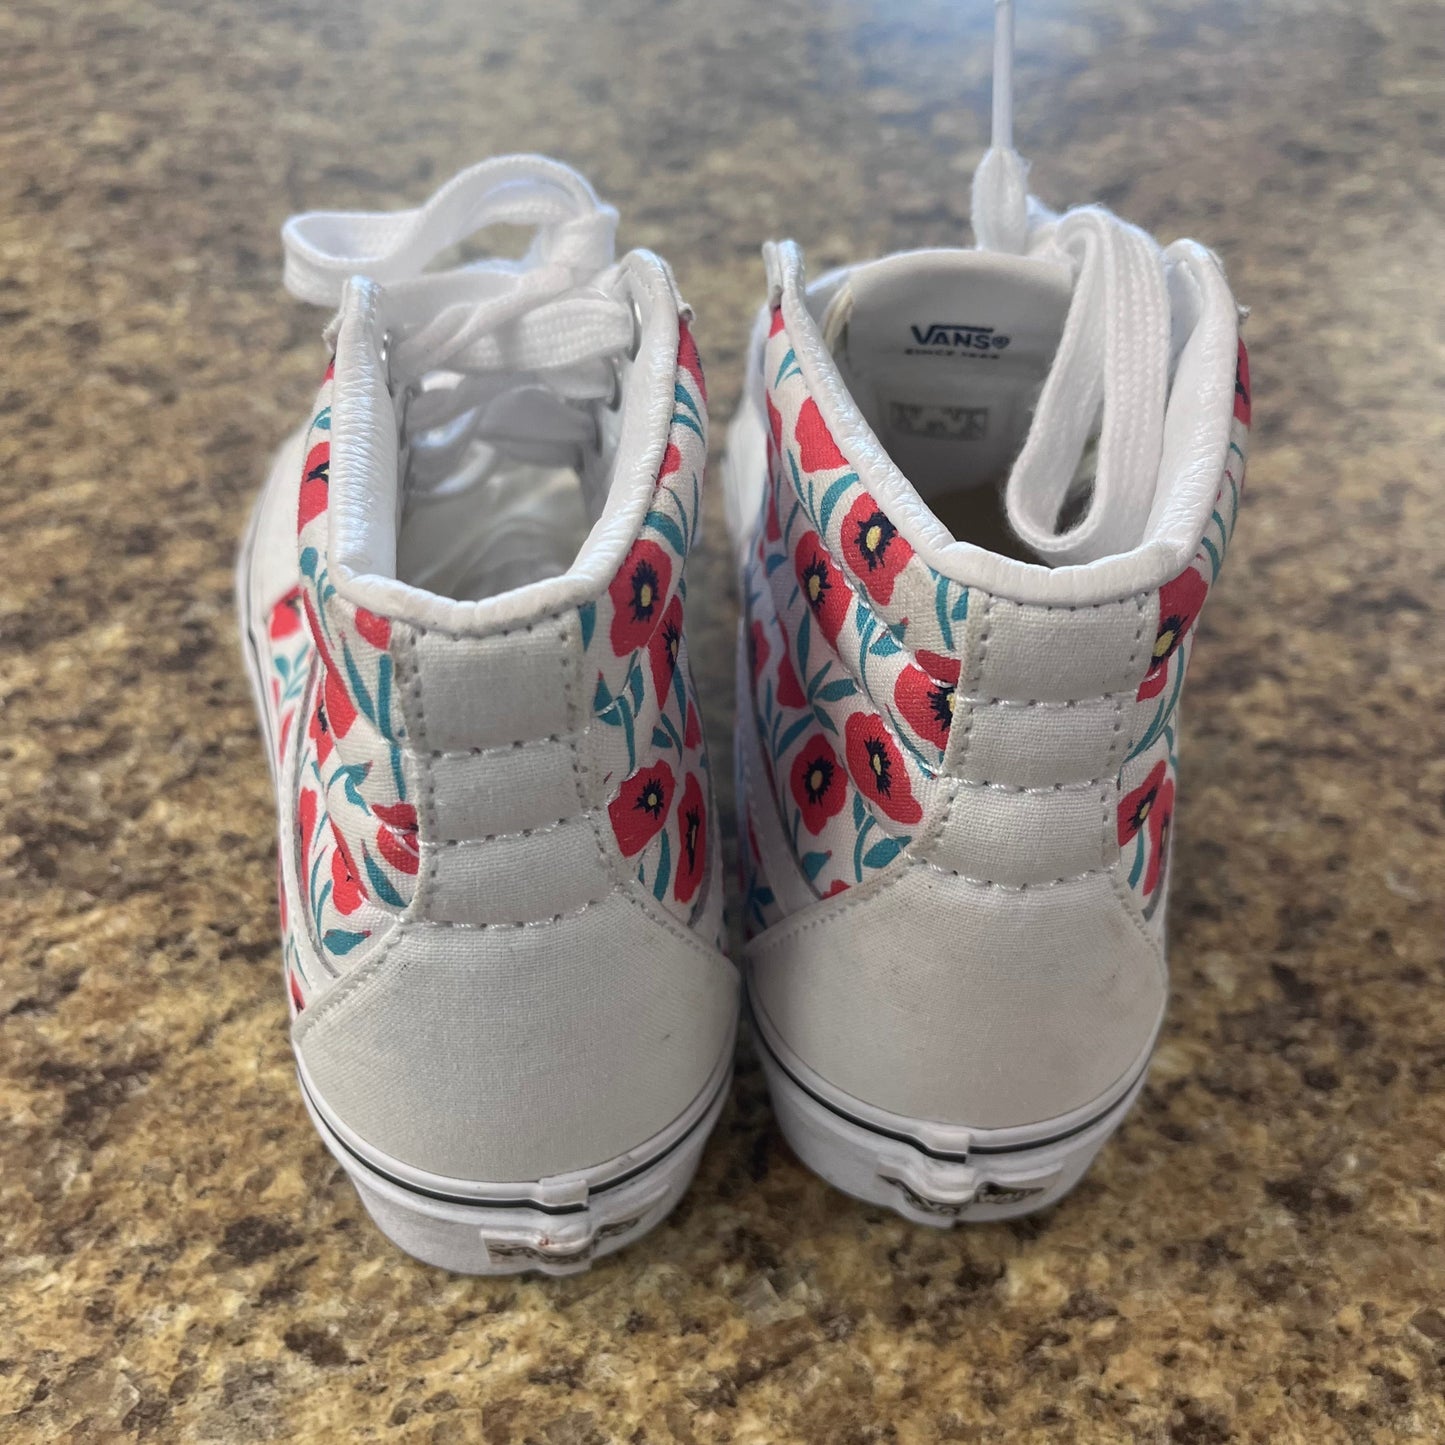 Flowered Shoes Sneakers Vans, Size 6.5